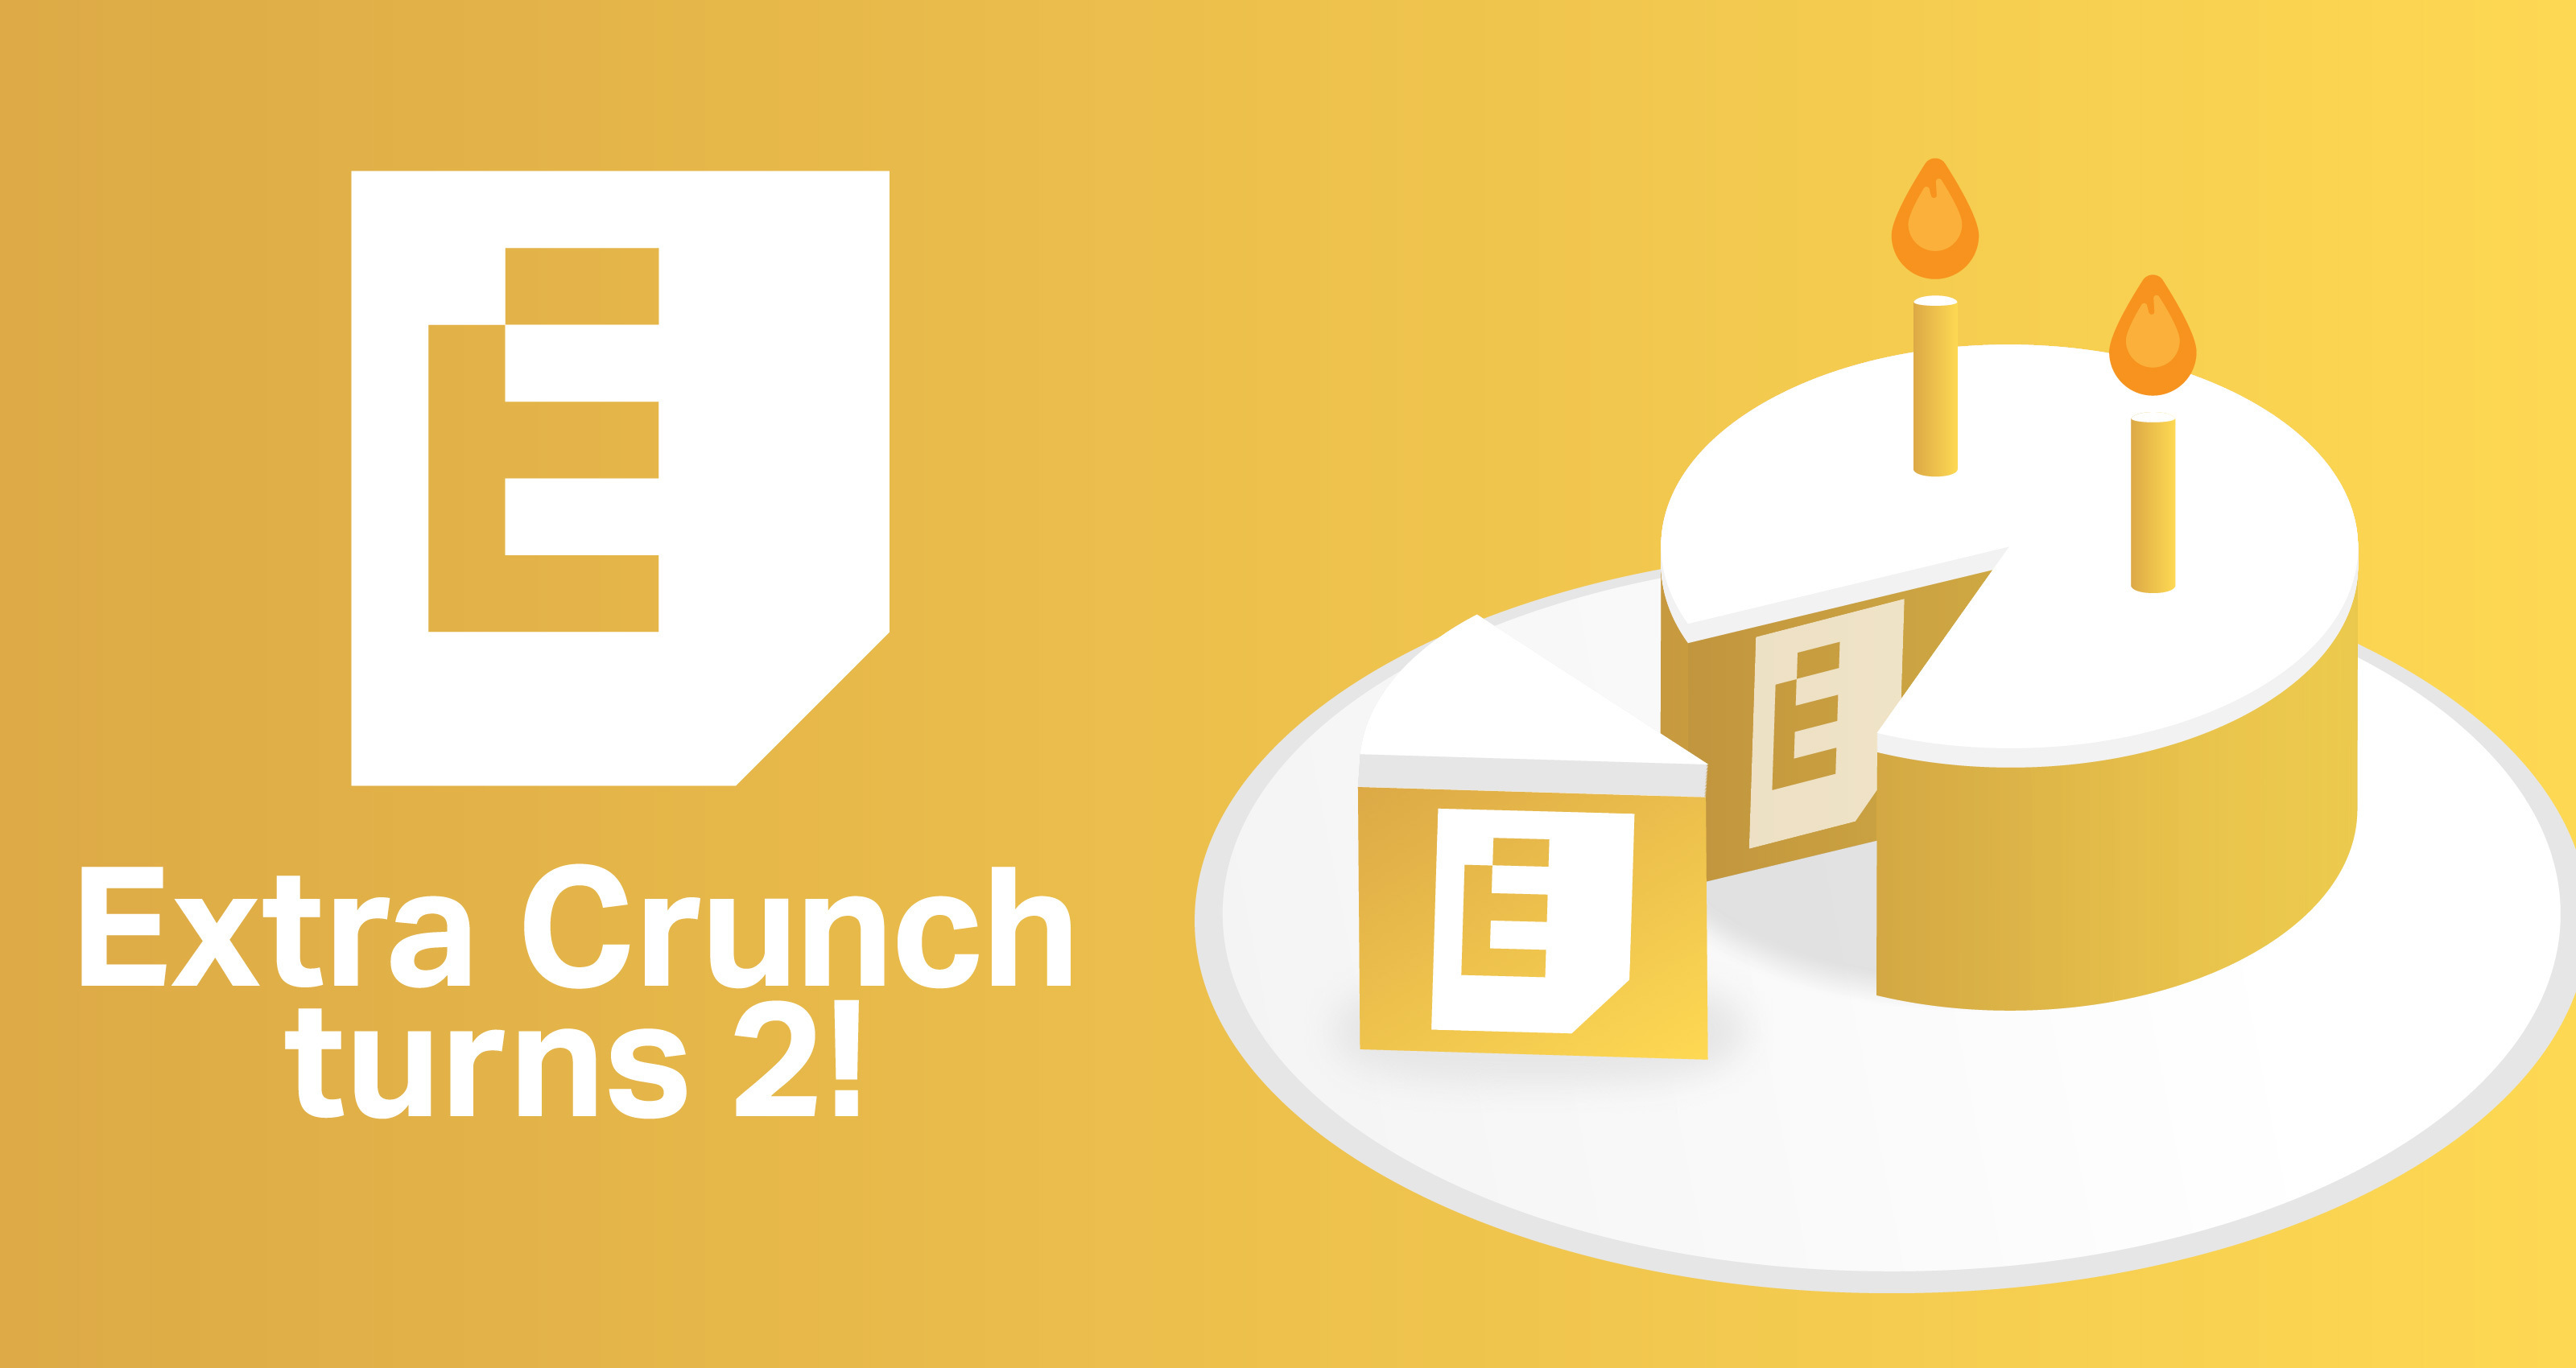 Extra Crunch turns two second anniversary image: a cake with two candles and the EC logo